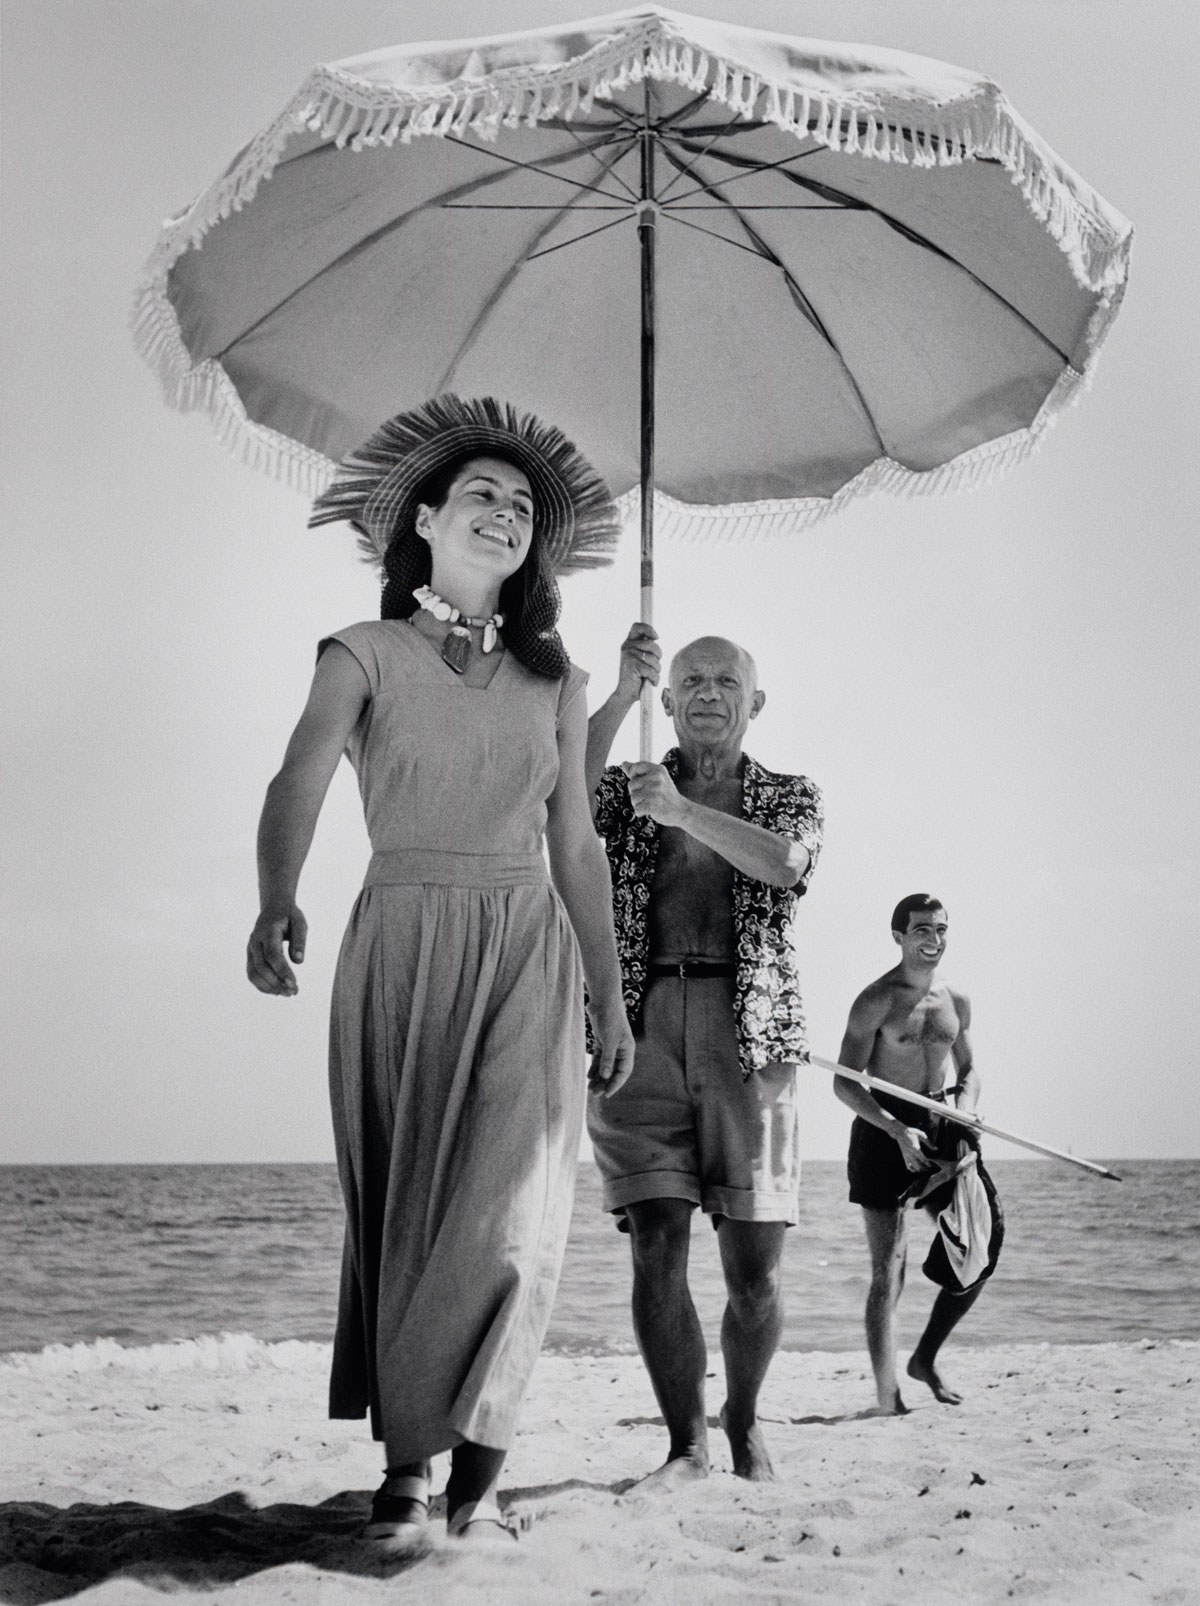 Pablo Picasso with his nephew Javier Vilato and Françoise Gilot on the beach. Golfe-Juan, France. August, 1948 © Robert Capa © International Center of Photography / Magnum Photos